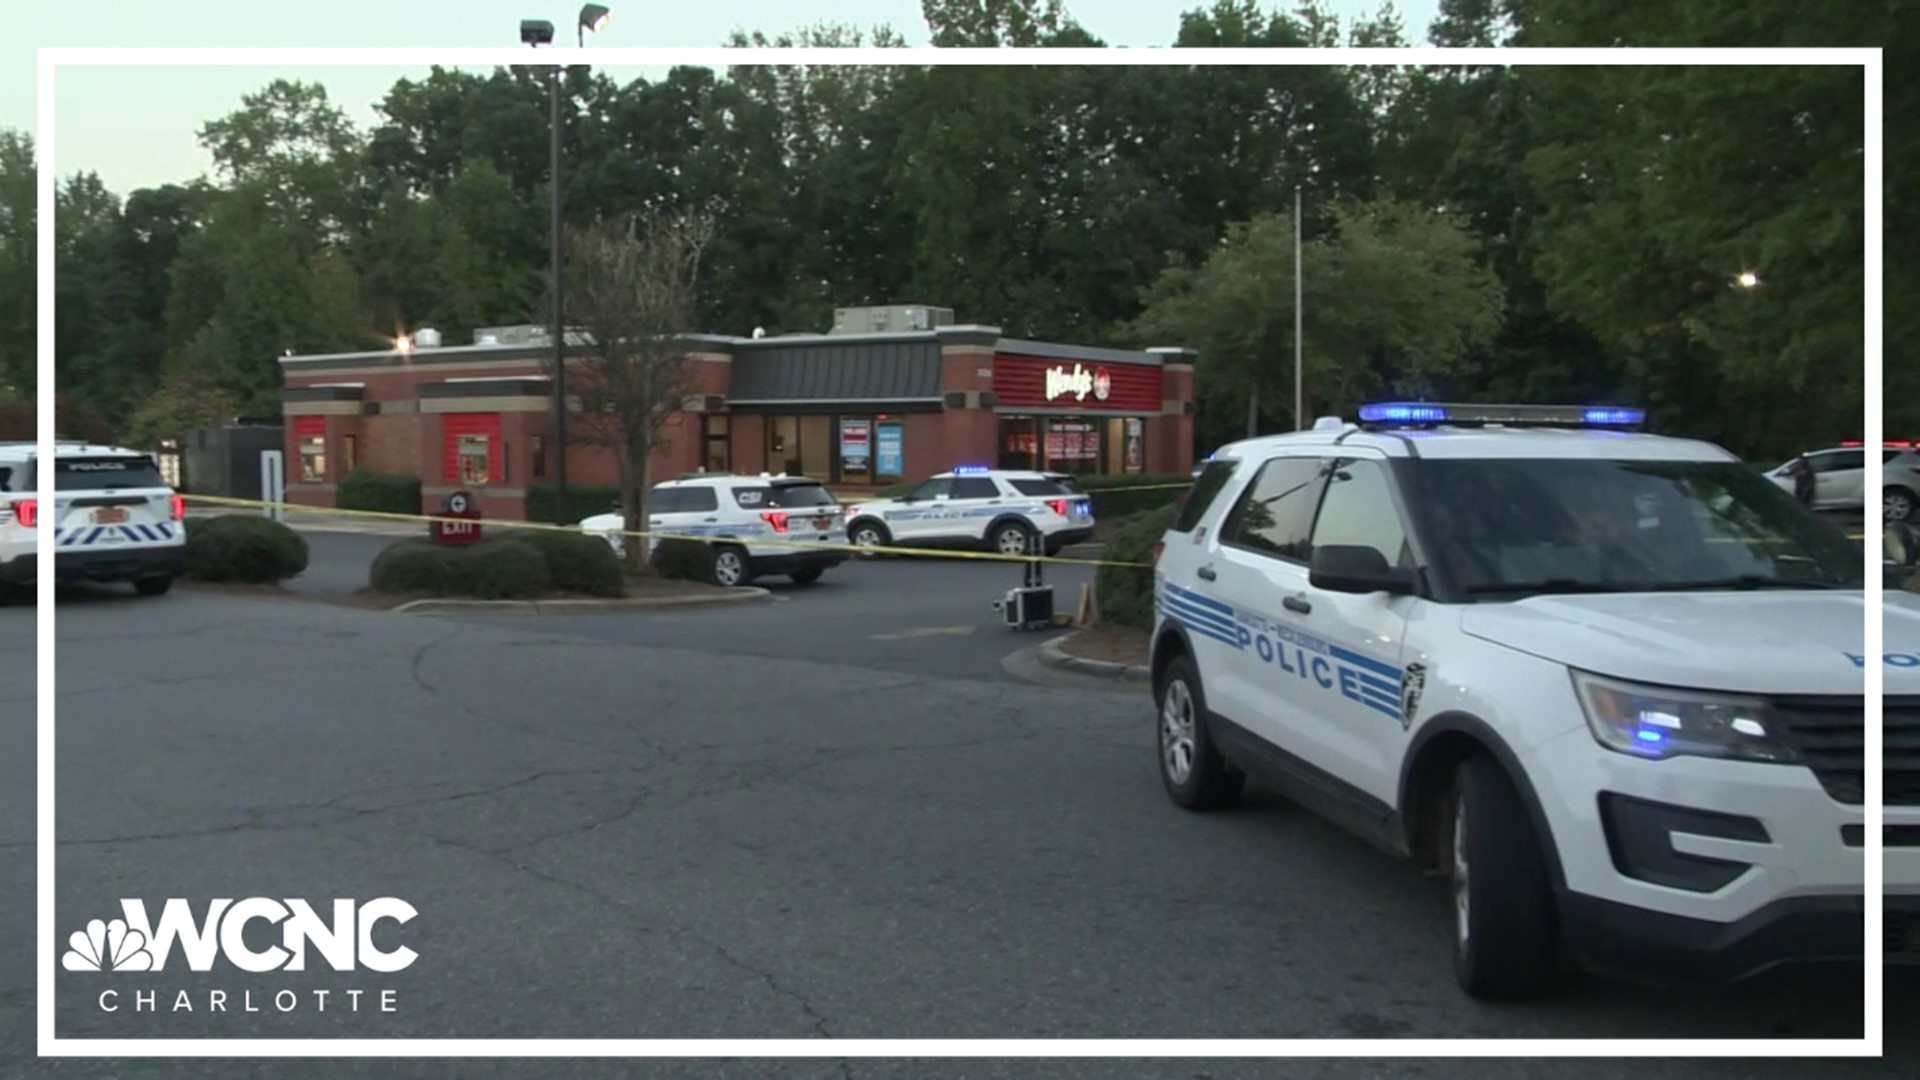 Two Wendy's employees got into an argument that led to the suspect pulling out a gun and shooting his co-worker, police said.